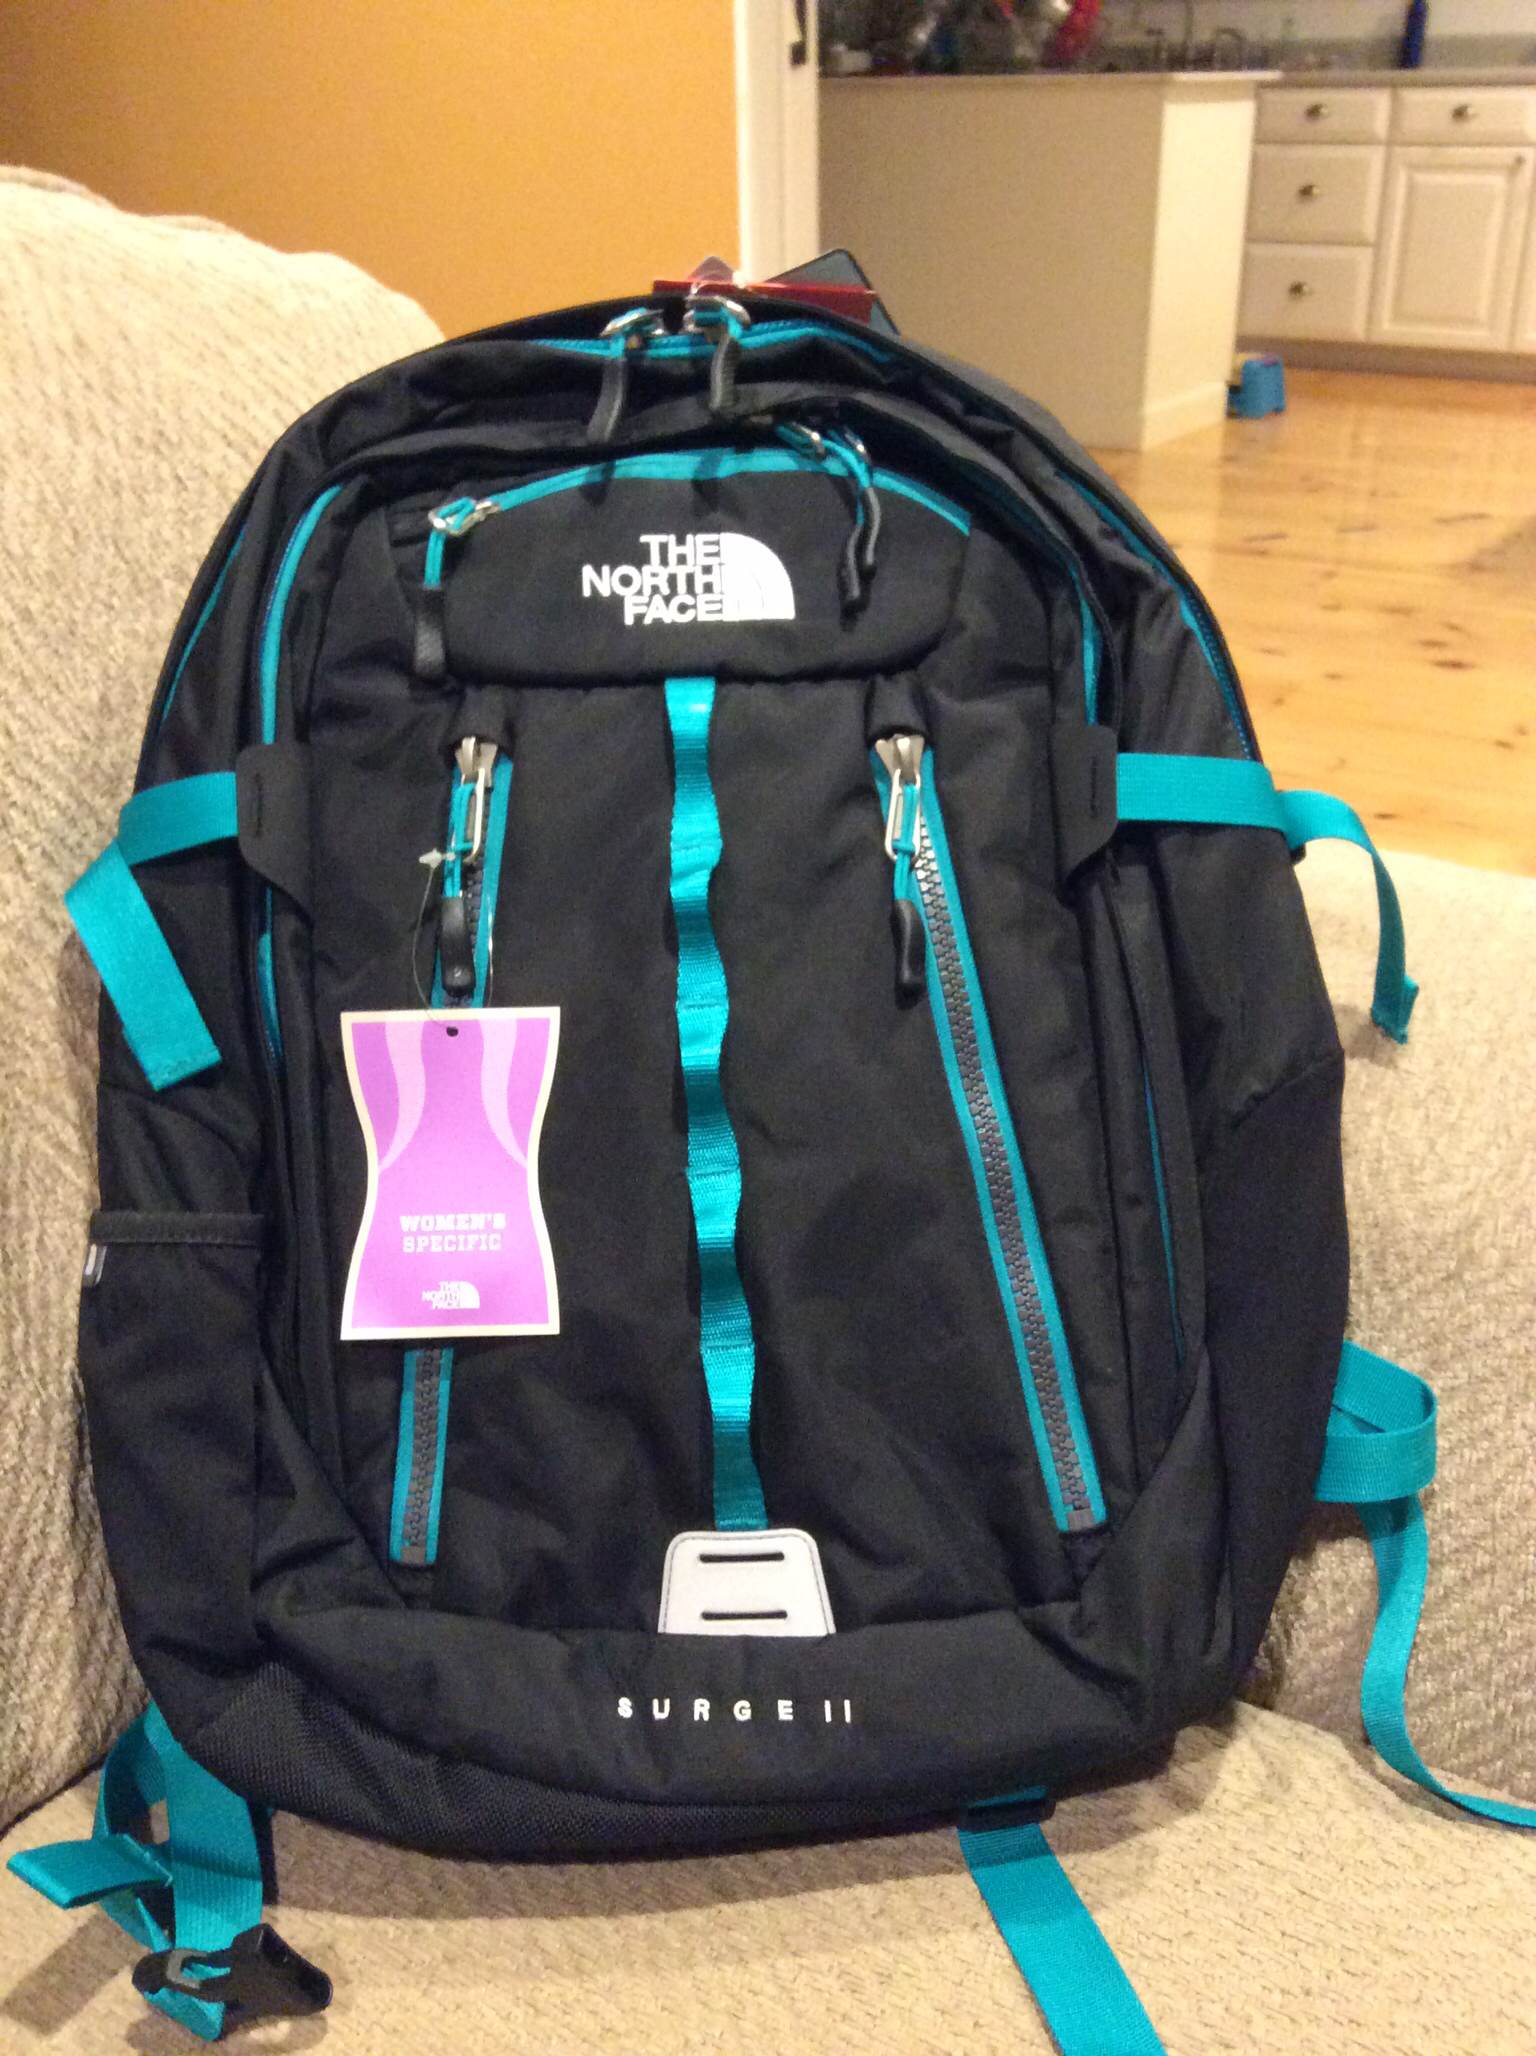 the north face surge ii